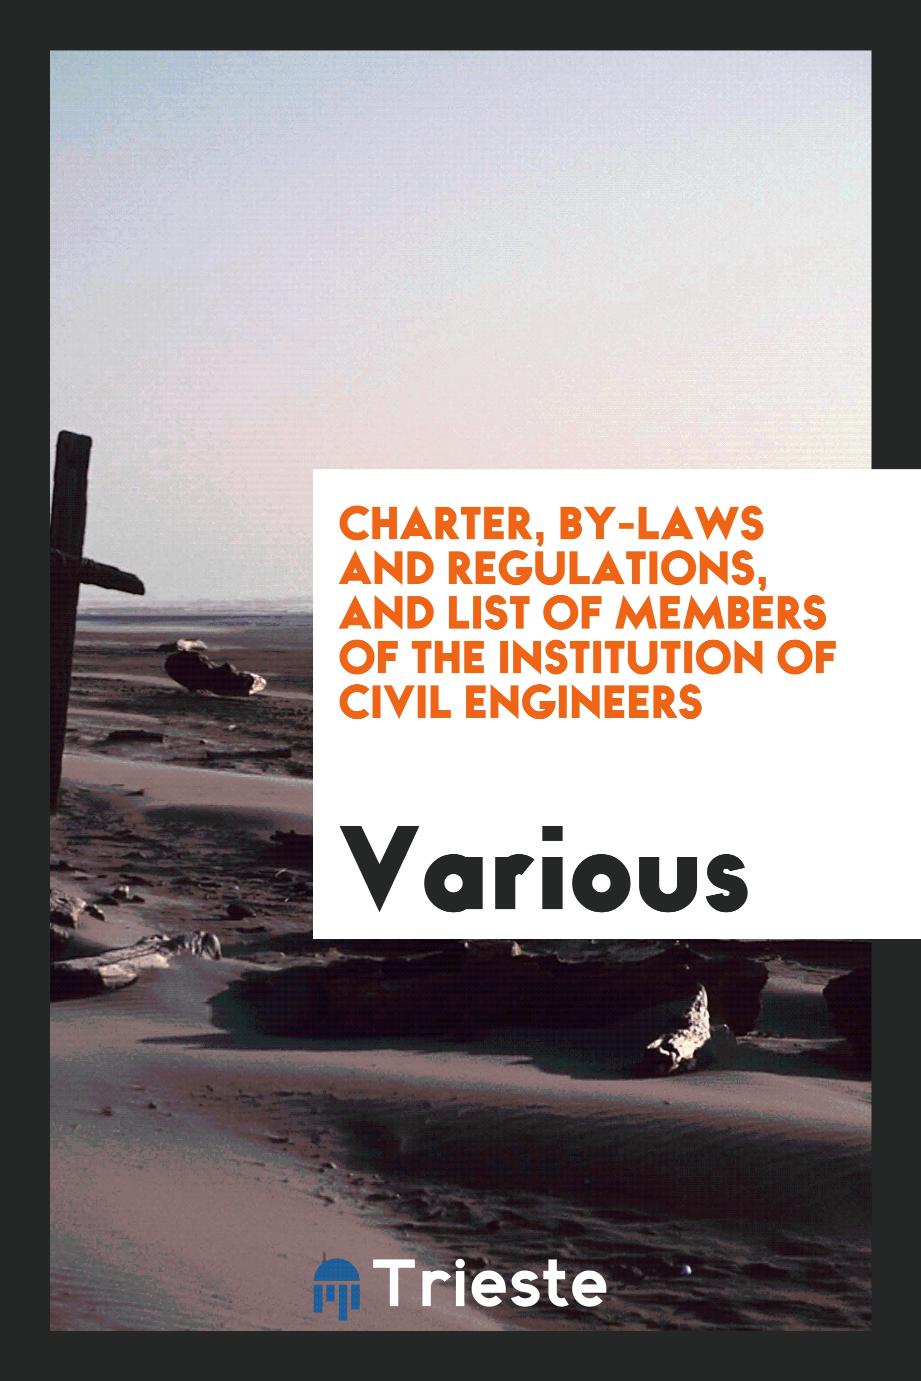 Charter, By-laws and Regulations, and List of Members of the Institution of Civil Engineers